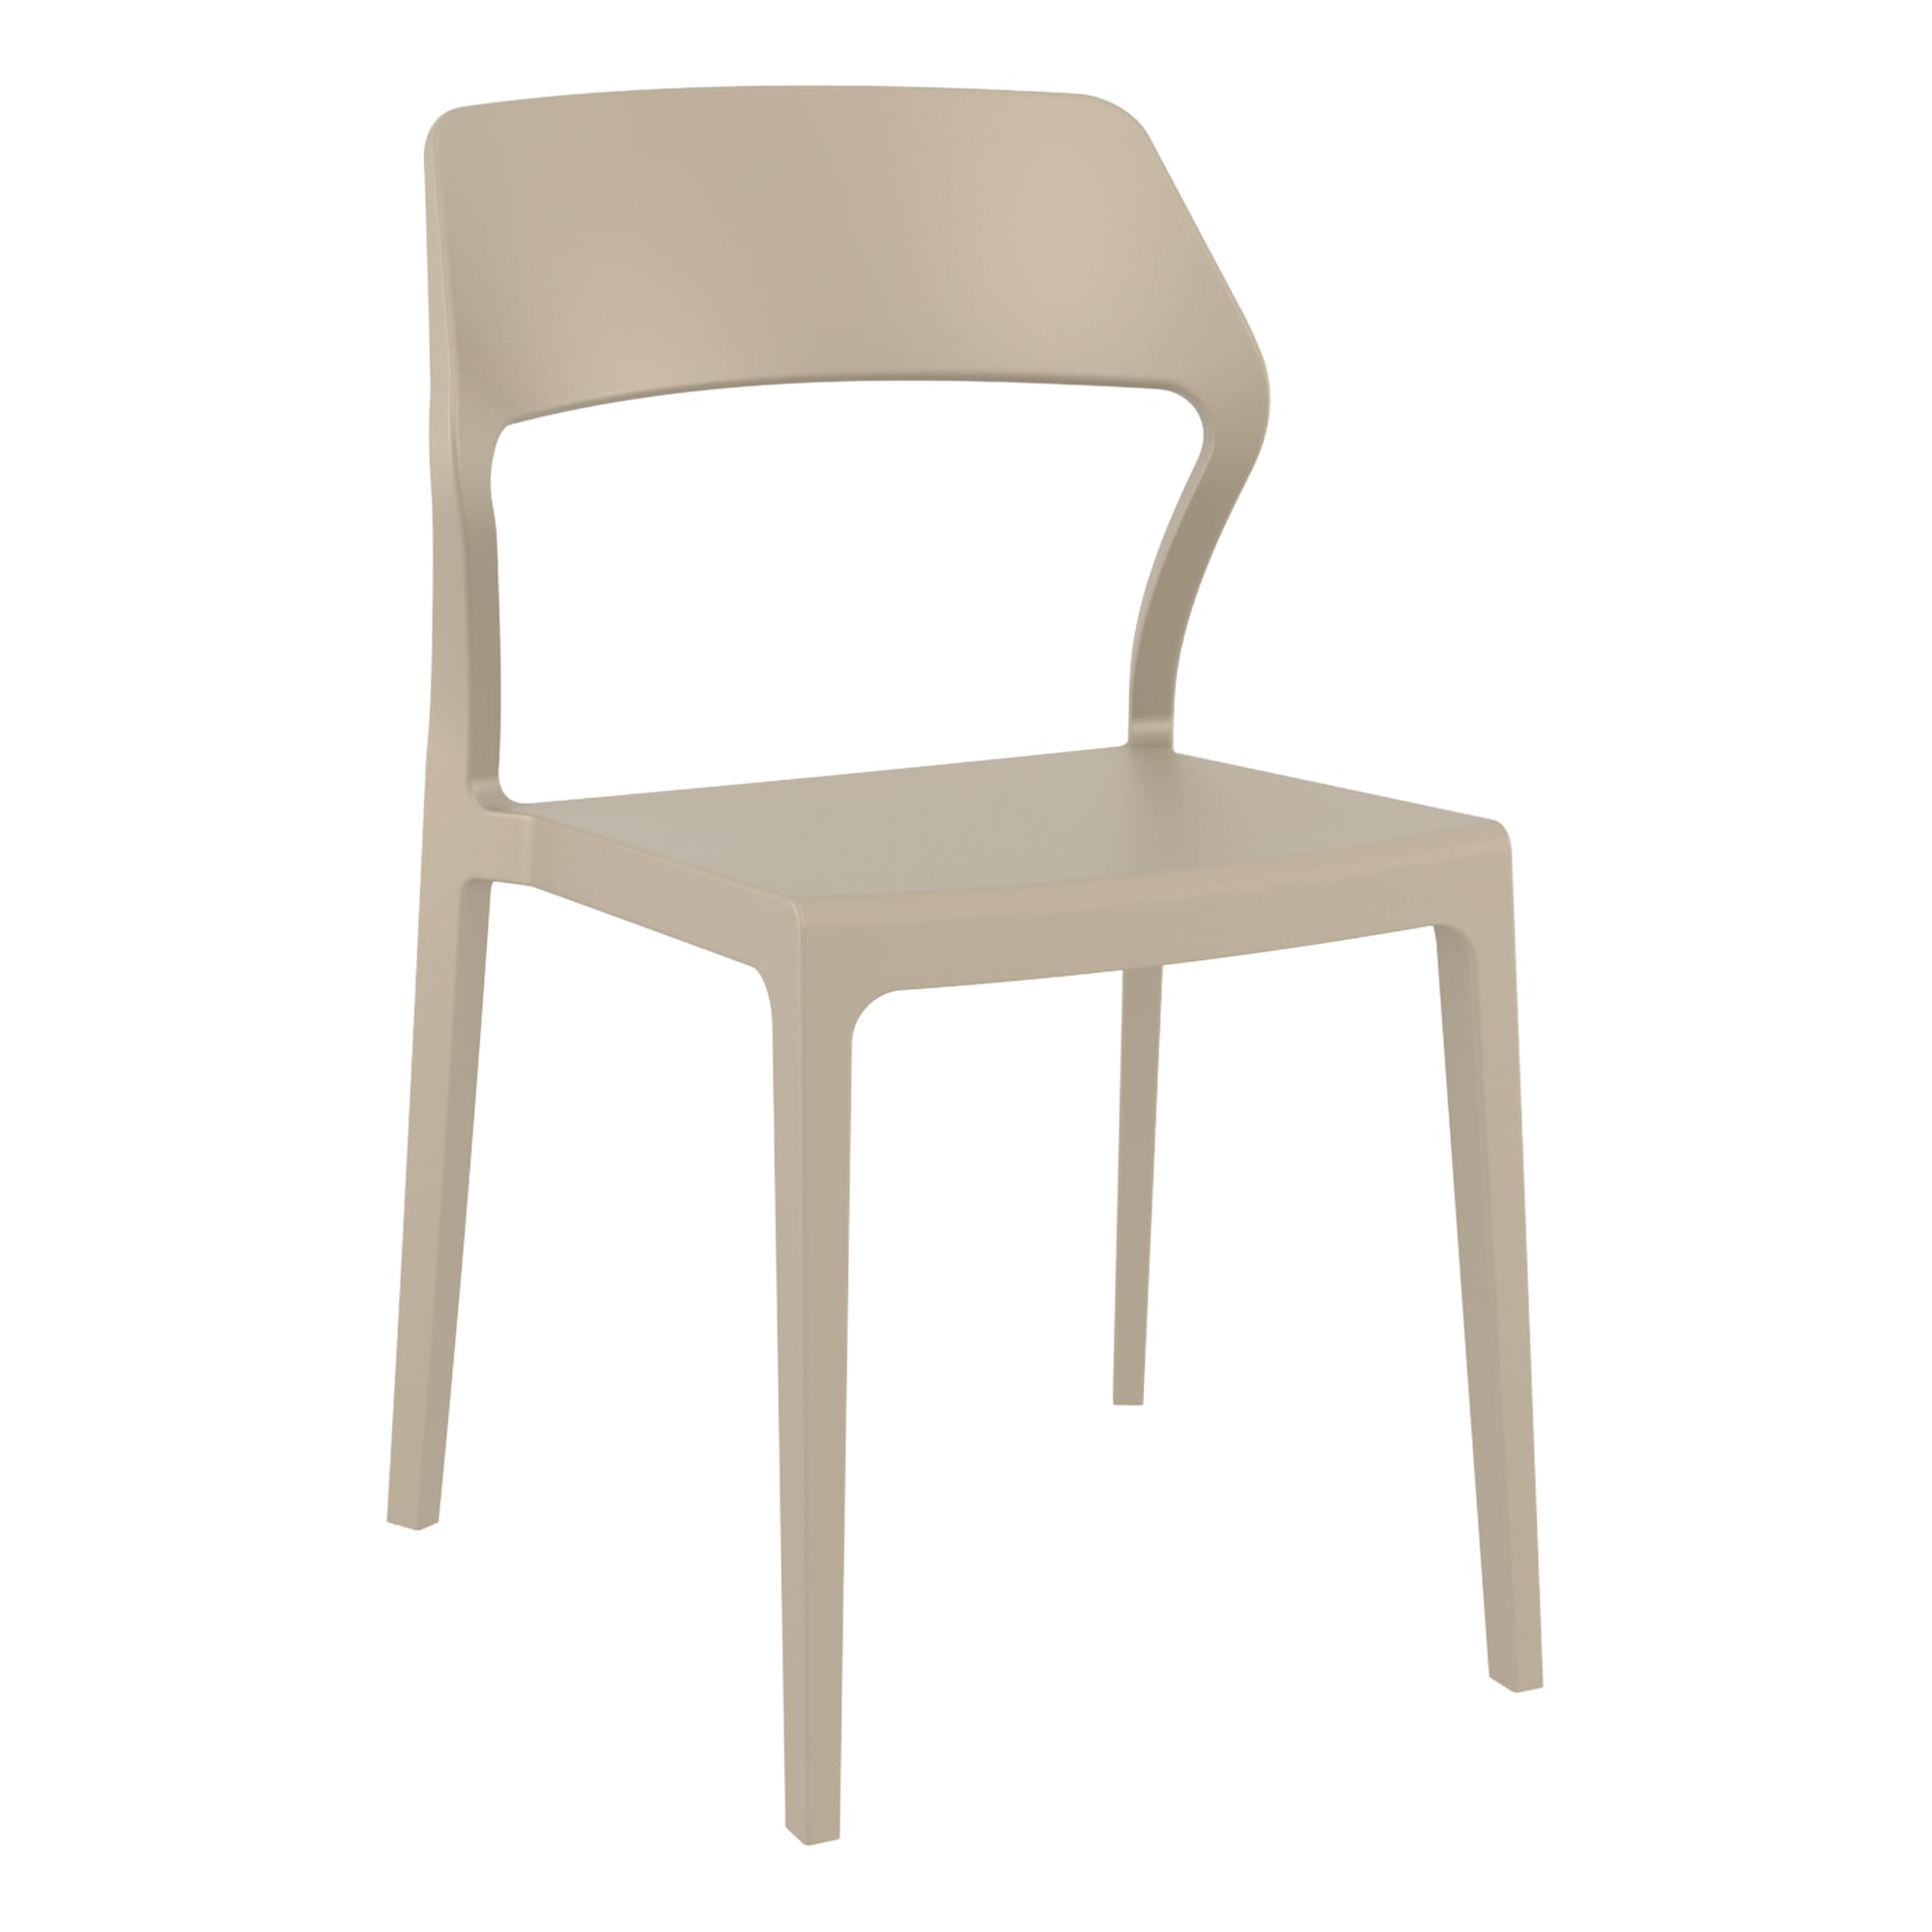 Sono Side Chair - Taupe